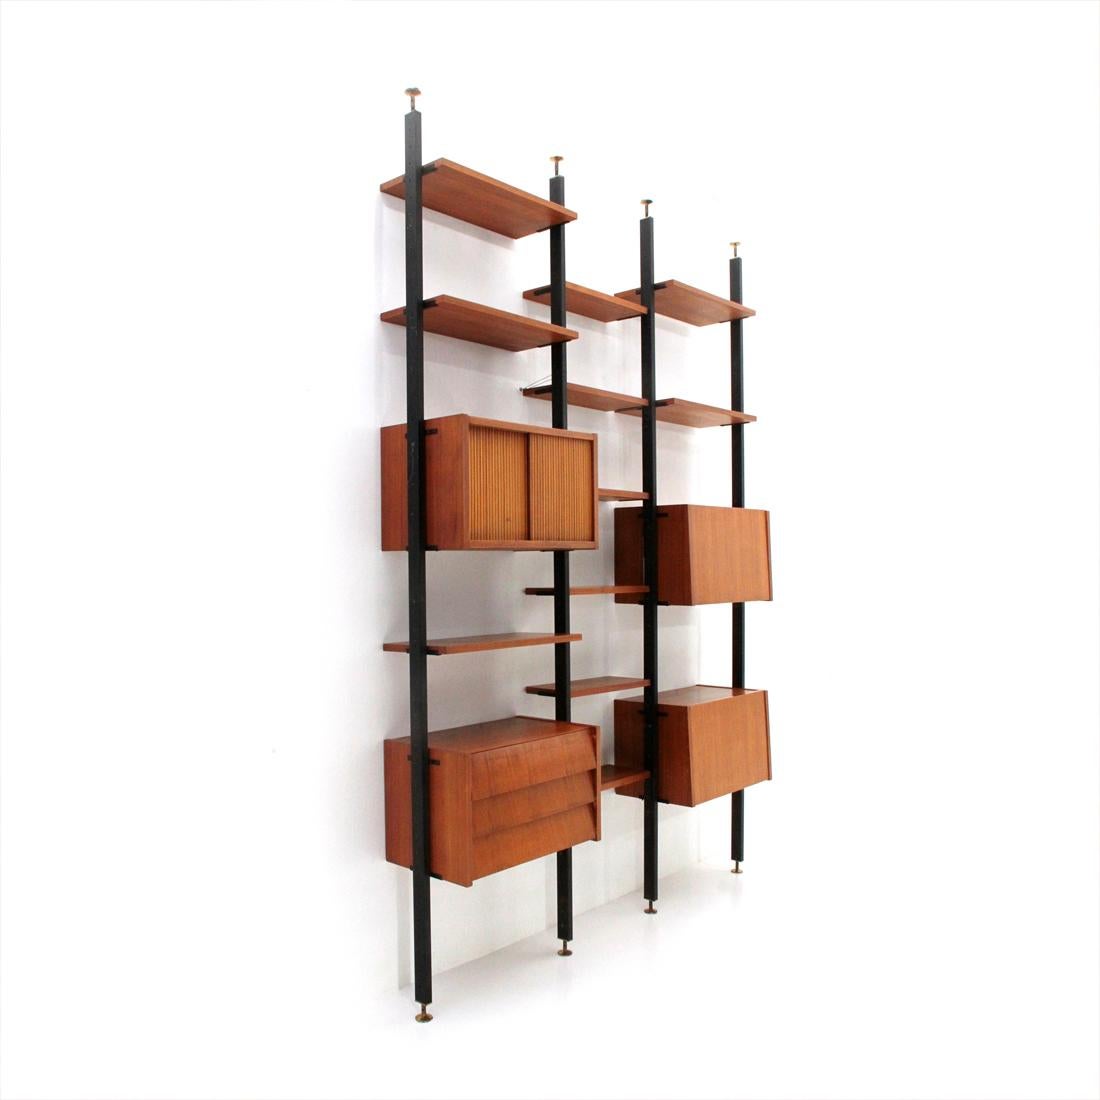 Italian-made bookcases produced in the 1960s.
Uprights in painted metal with adjustable brass terminals.
Wall units in teak veneered wood.
11 shelves.
A container compartment with sliding doors.
Two compartments with flap opening, one with red